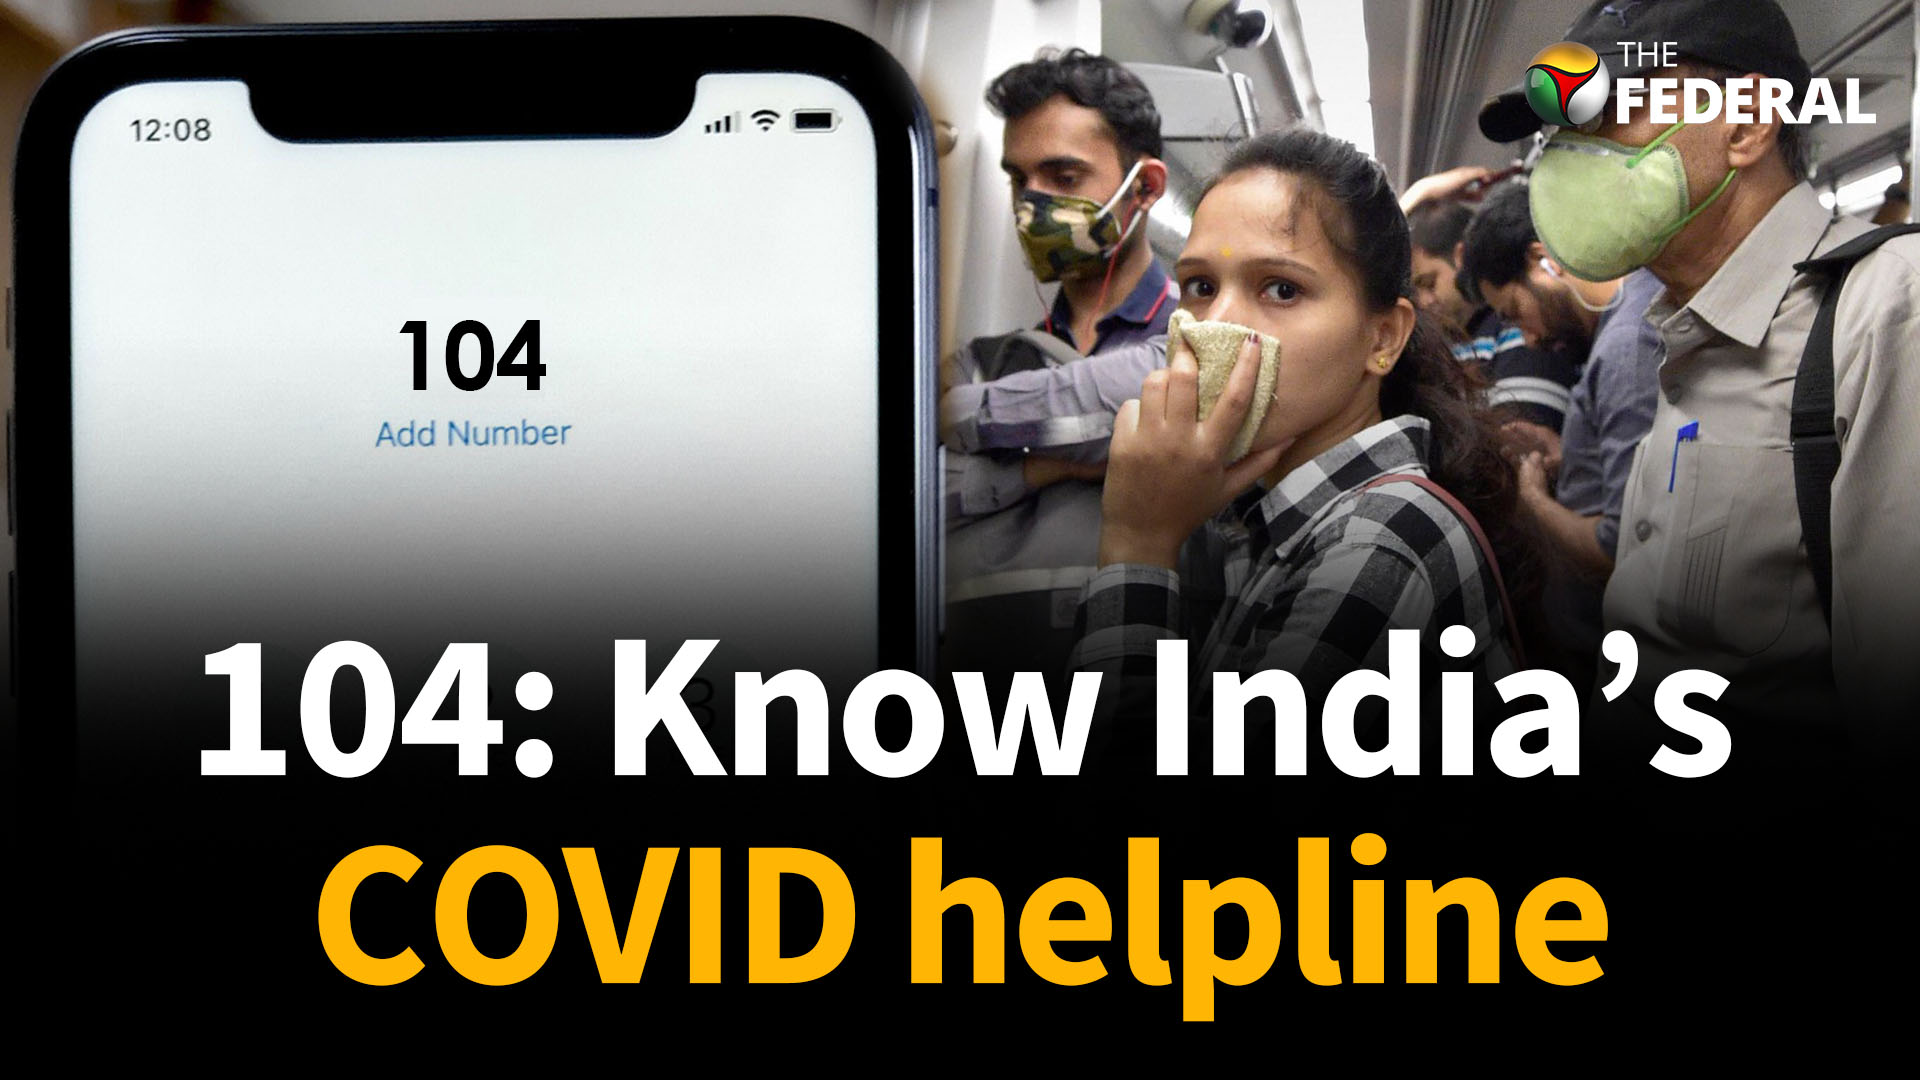 How does 104, Indias COVID helpline, assist a caller?